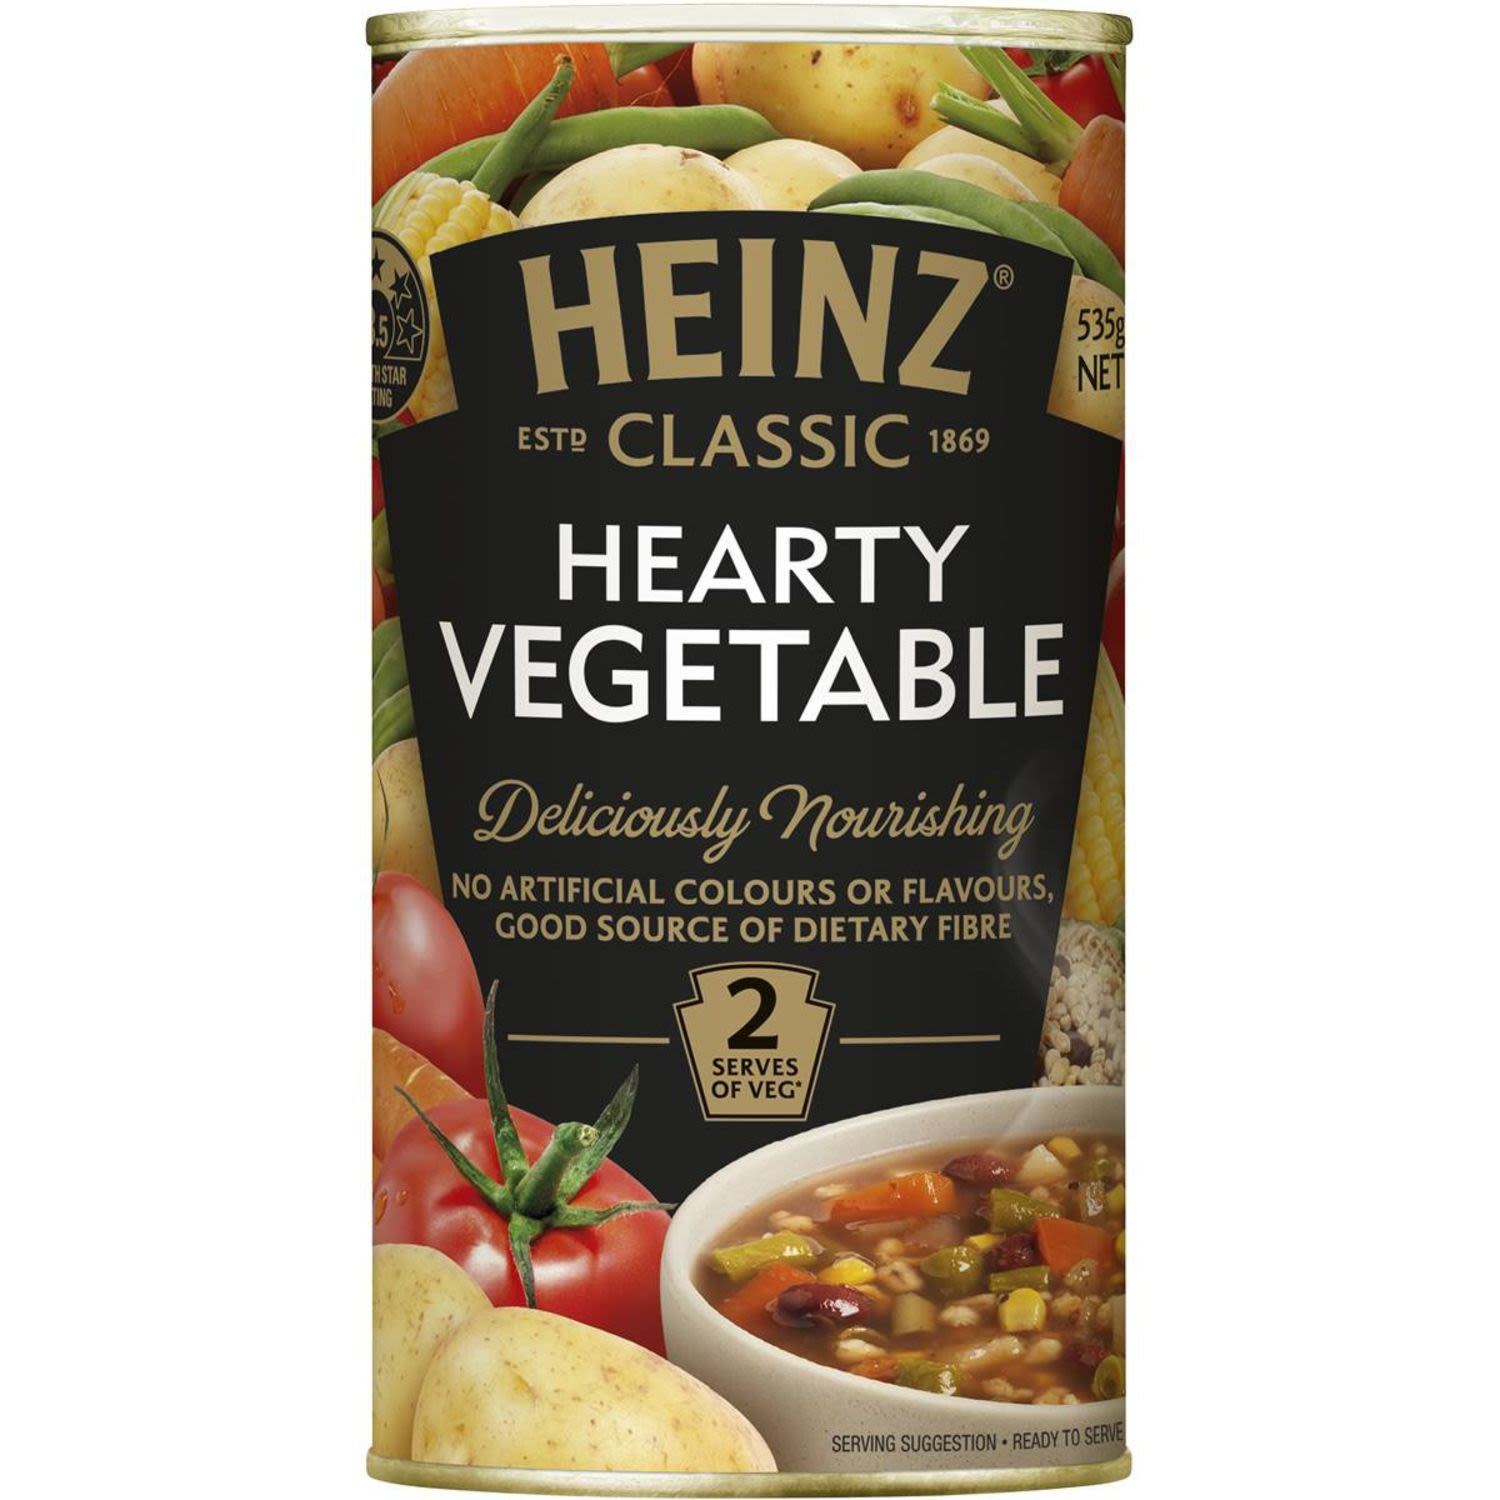 Heinz Classic Canned Soup Hearty Vegetable, 535 Gram